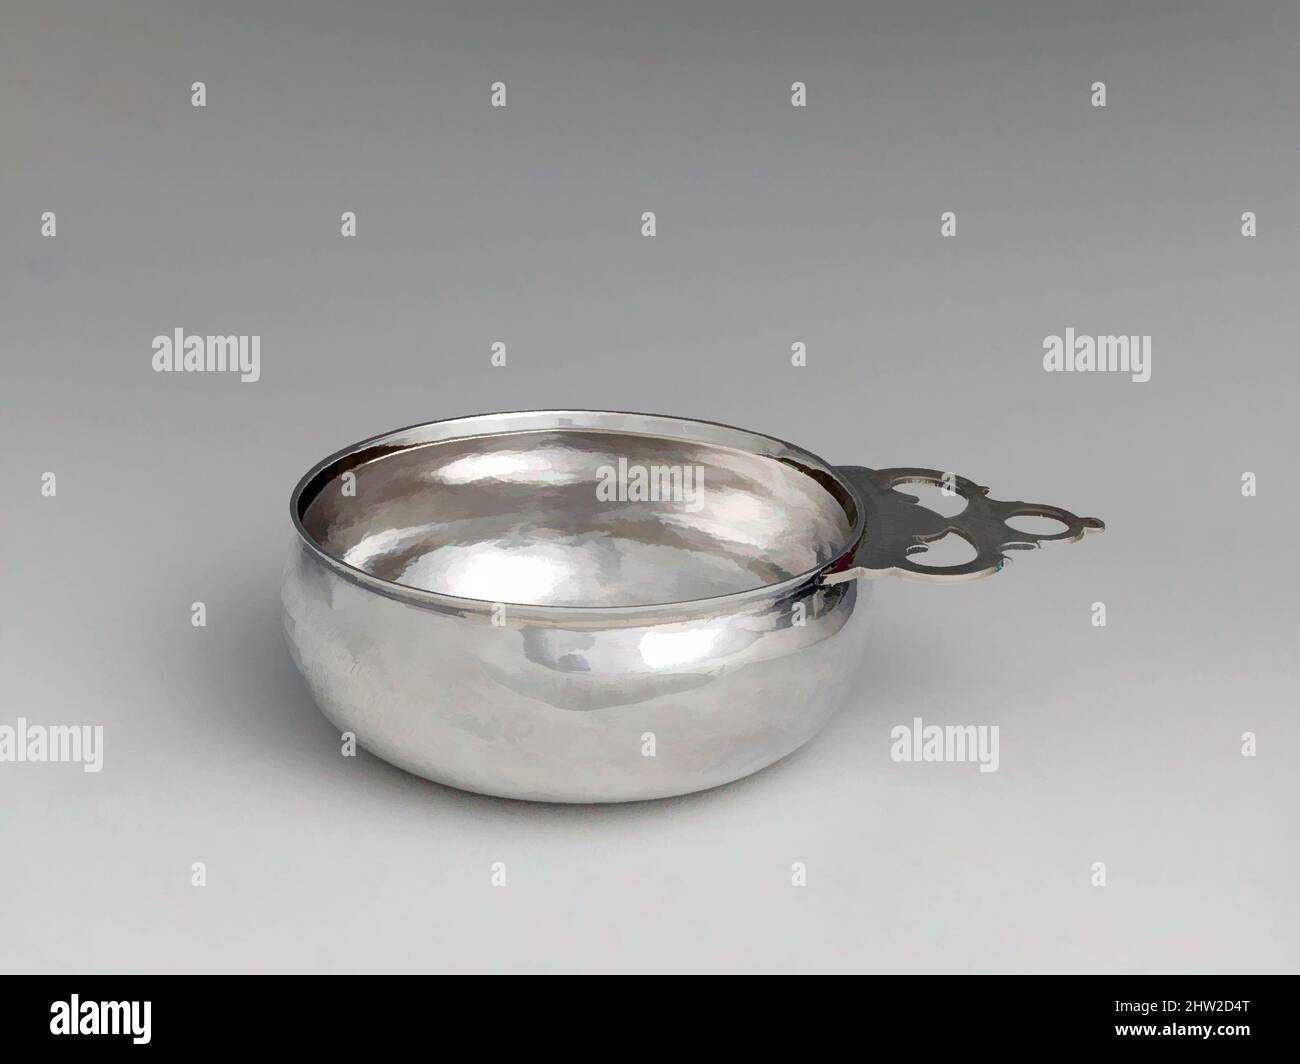 Art inspired by Porringer, 1730–1750, Made in New York, New York, United States, American, Silver, Overall: 2 1/4 x 7 3/8 in. (5.7 x 18.7 cm); 7 oz. 6 dwt. (227.5 g), Silver, Adrian Bancker (1703–1772, Classic works modernized by Artotop with a splash of modernity. Shapes, color and value, eye-catching visual impact on art. Emotions through freedom of artworks in a contemporary way. A timeless message pursuing a wildly creative new direction. Artists turning to the digital medium and creating the Artotop NFT Stock Photo